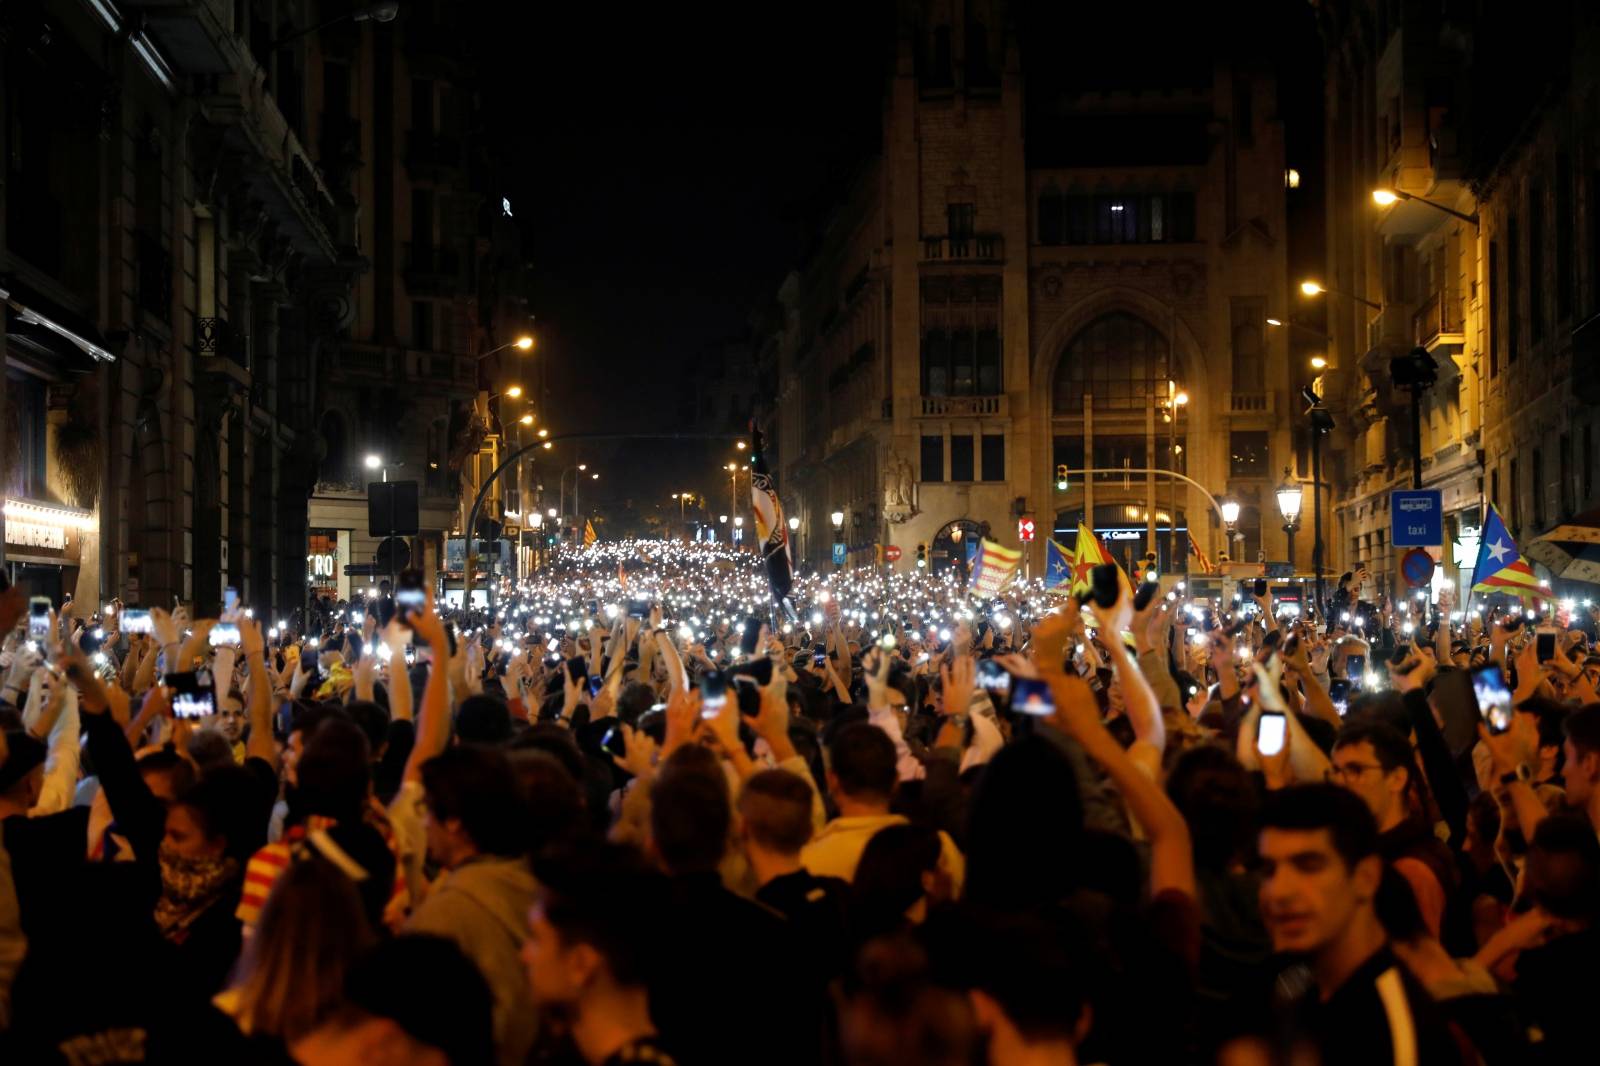 Demonstrators hold up their phones during a protest after a verdict in a trial over a banned independence referendum, in Barcelona